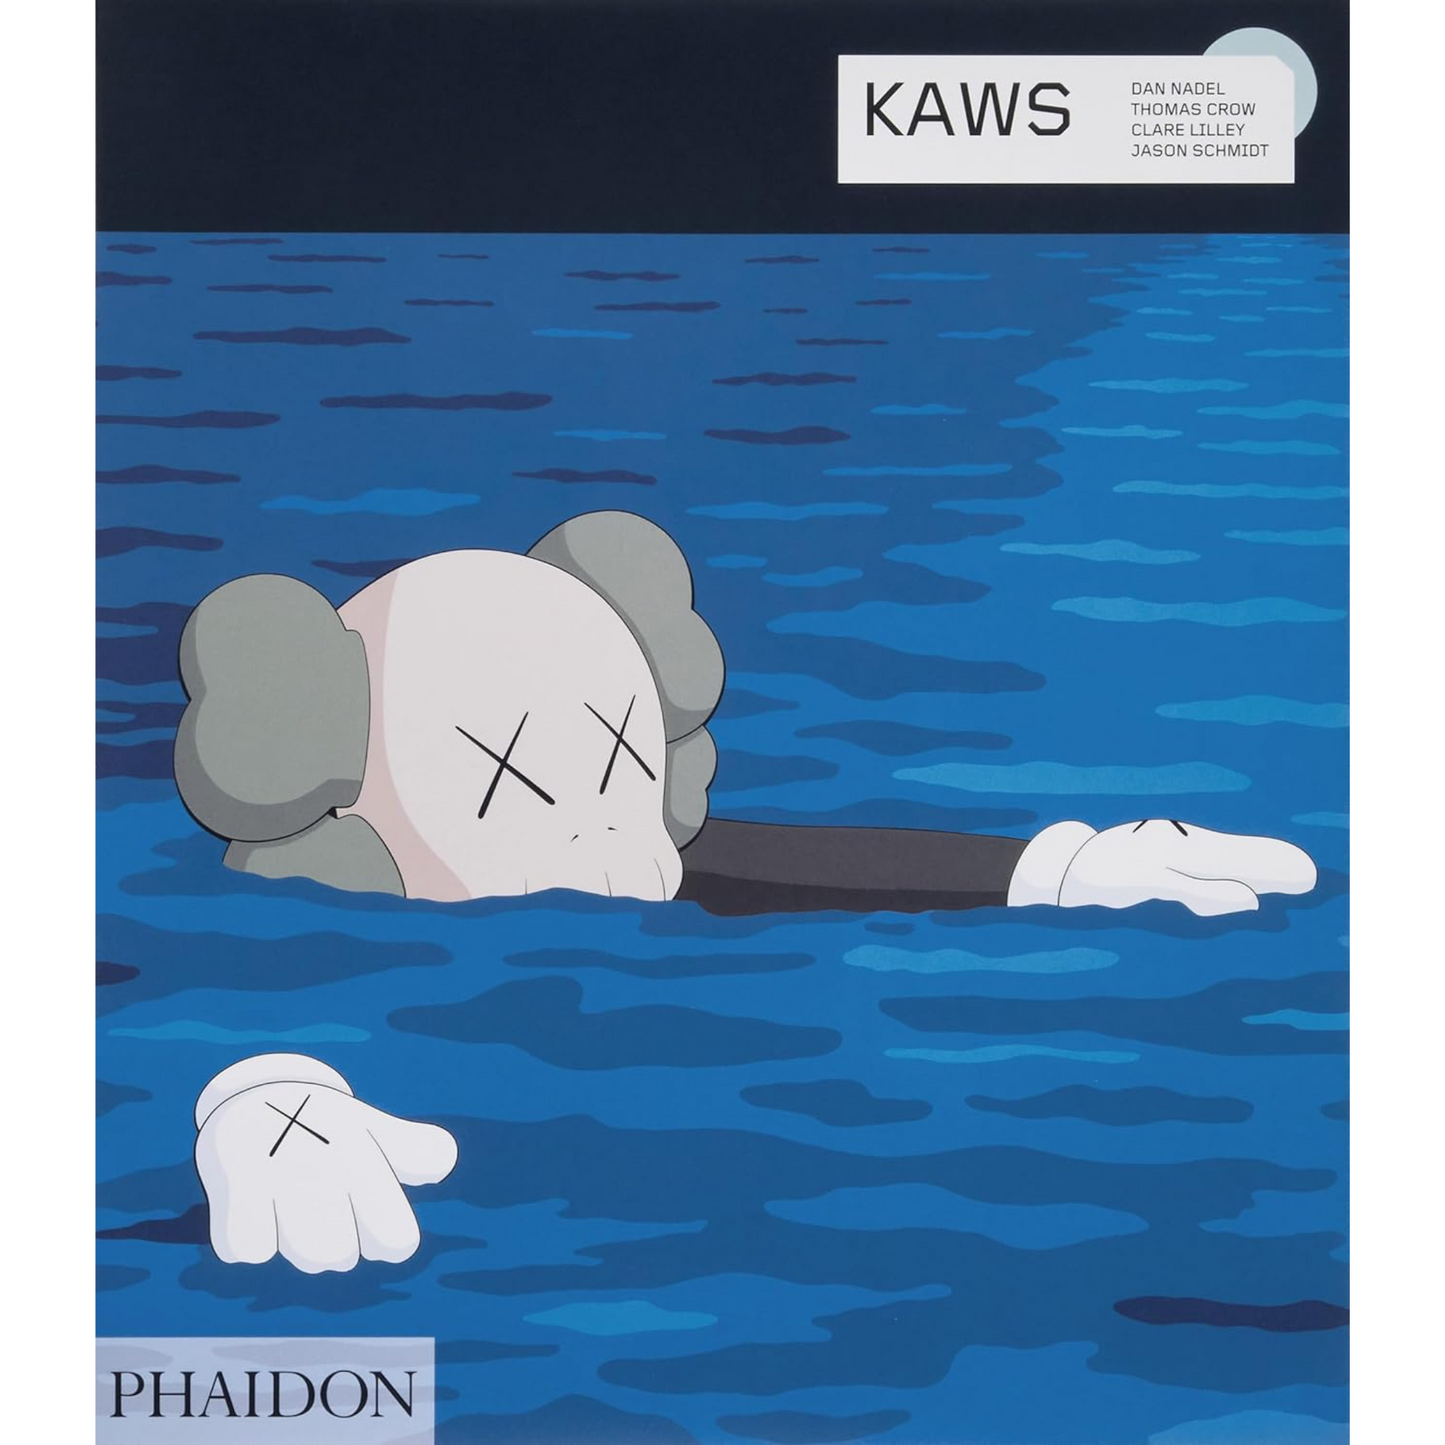 Load image into Gallery viewer, Cover with KAWS cartoon character apparently drowning.
